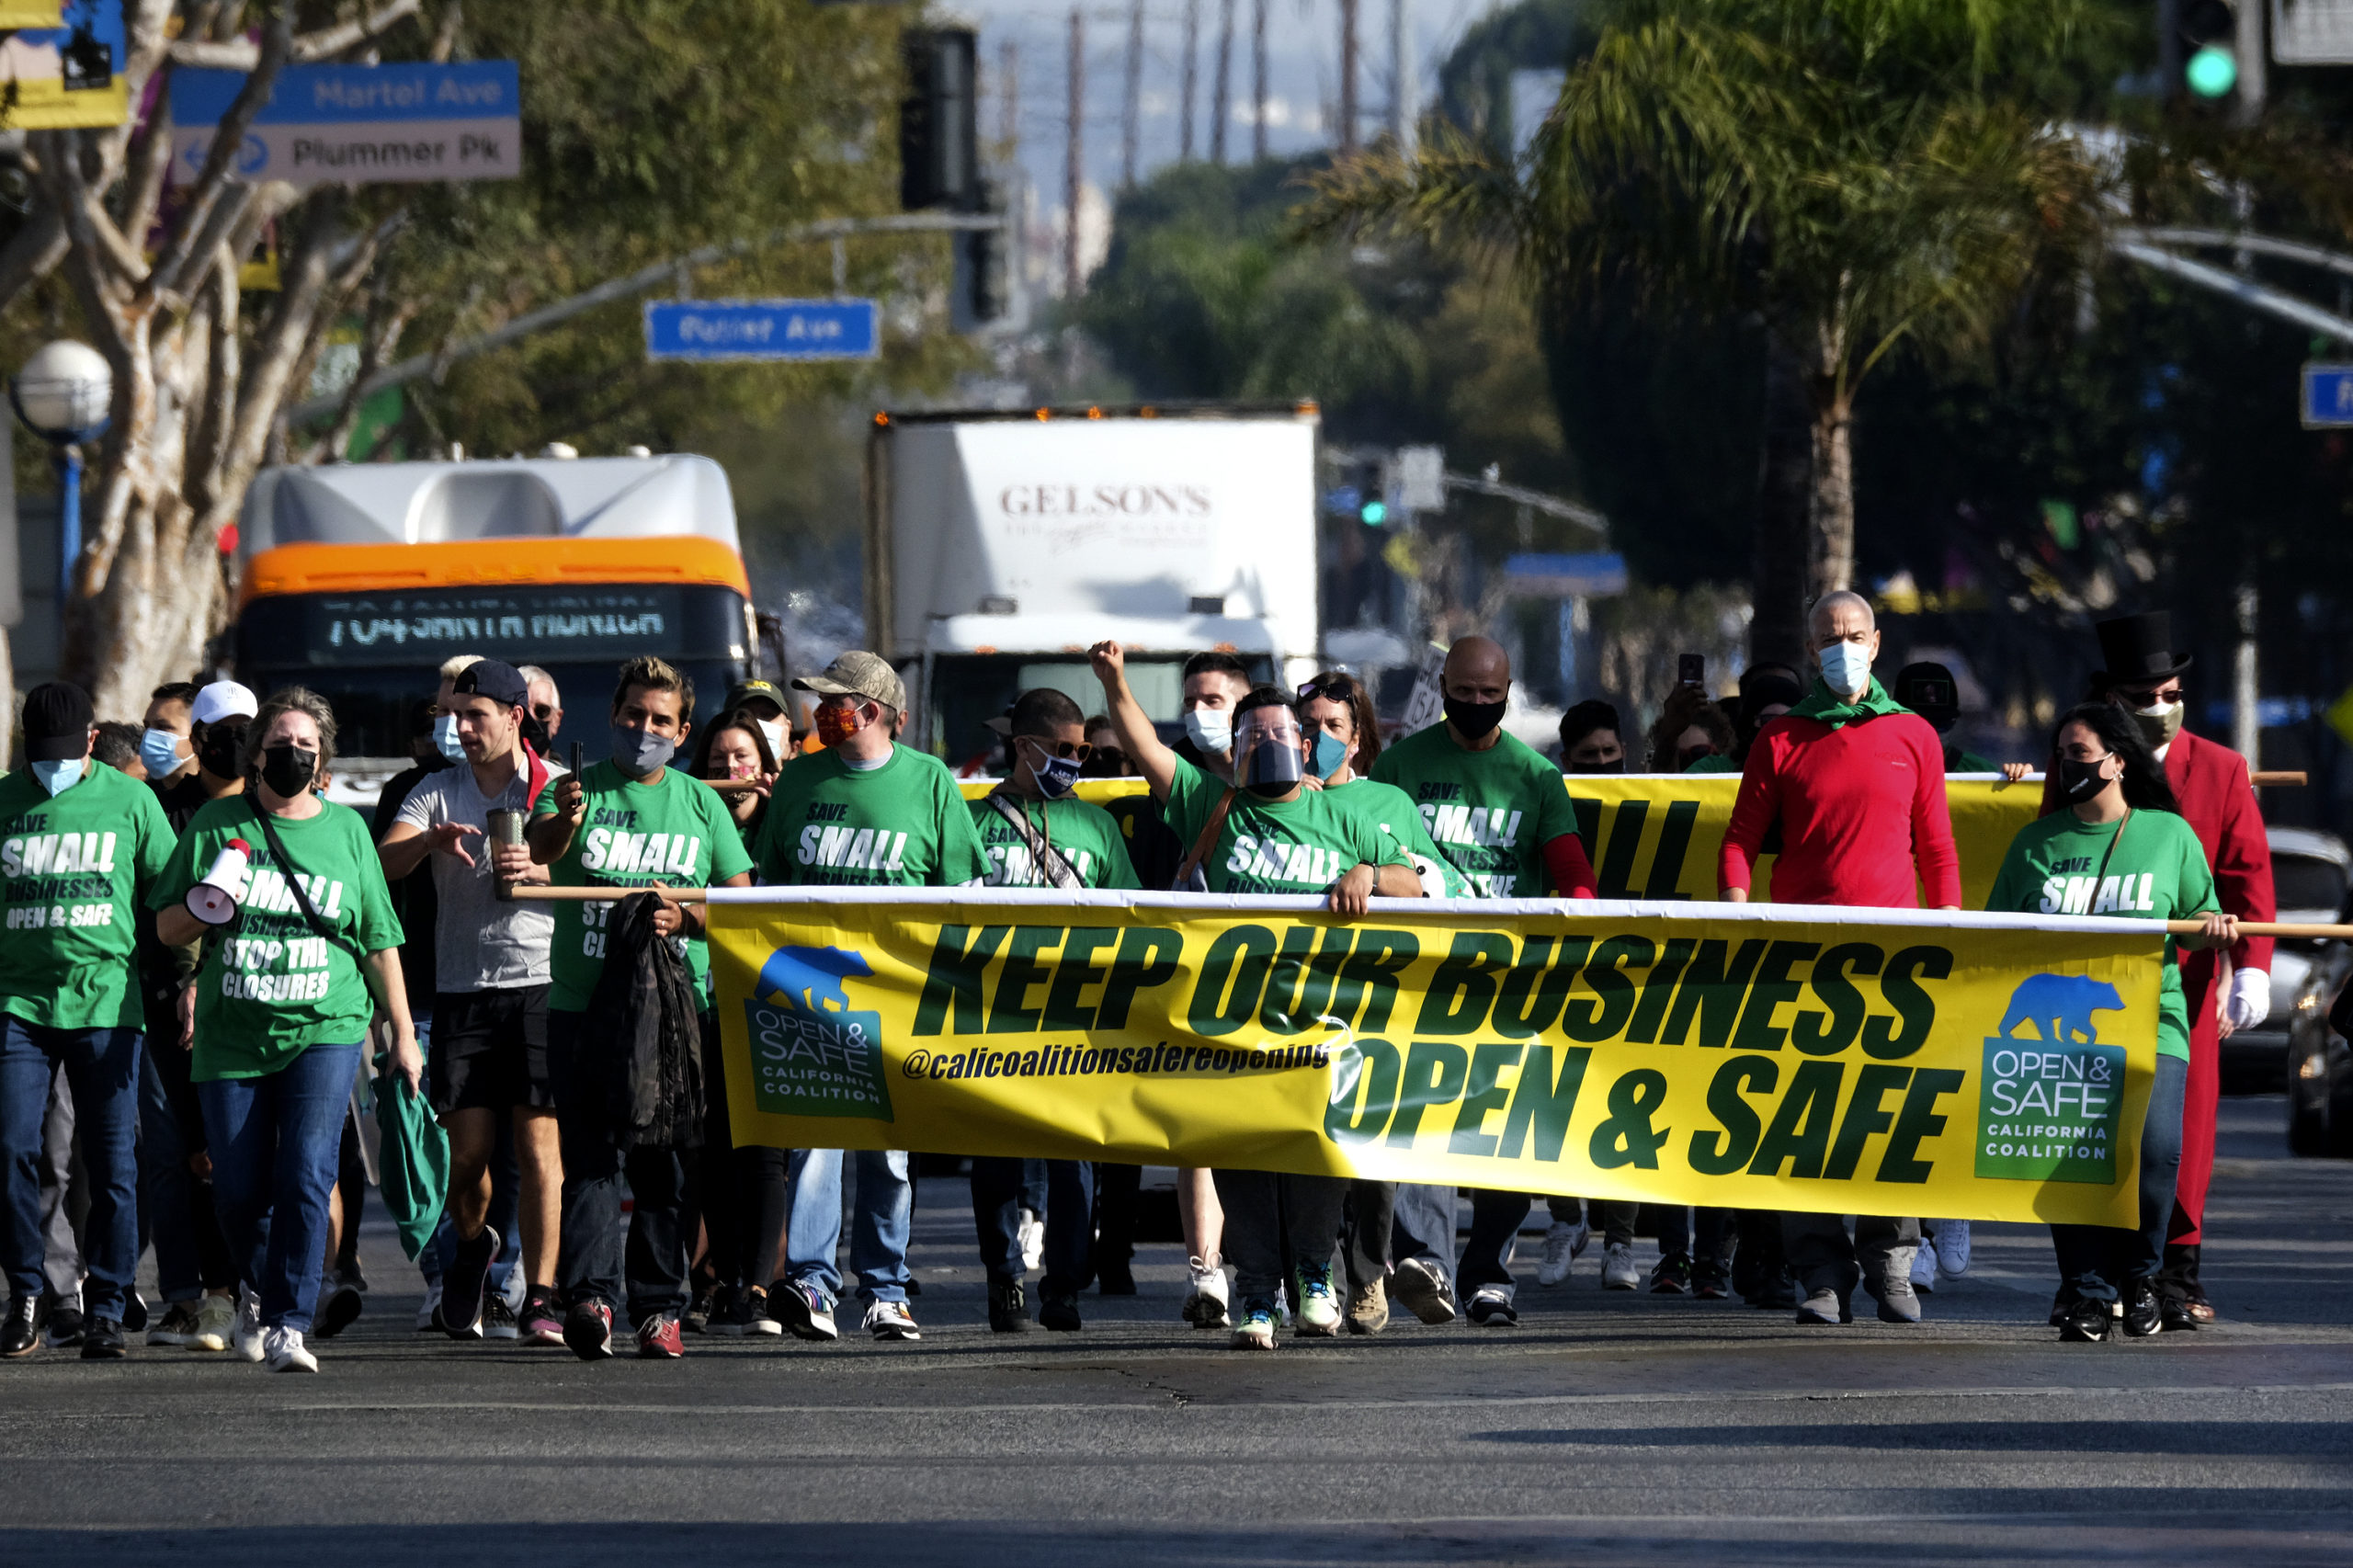 Members of small business owners take part in a 'Save Small Business' protest in Los Angeles, California on Dec. 12. (Ringo Chiu/AFP via Getty Images)